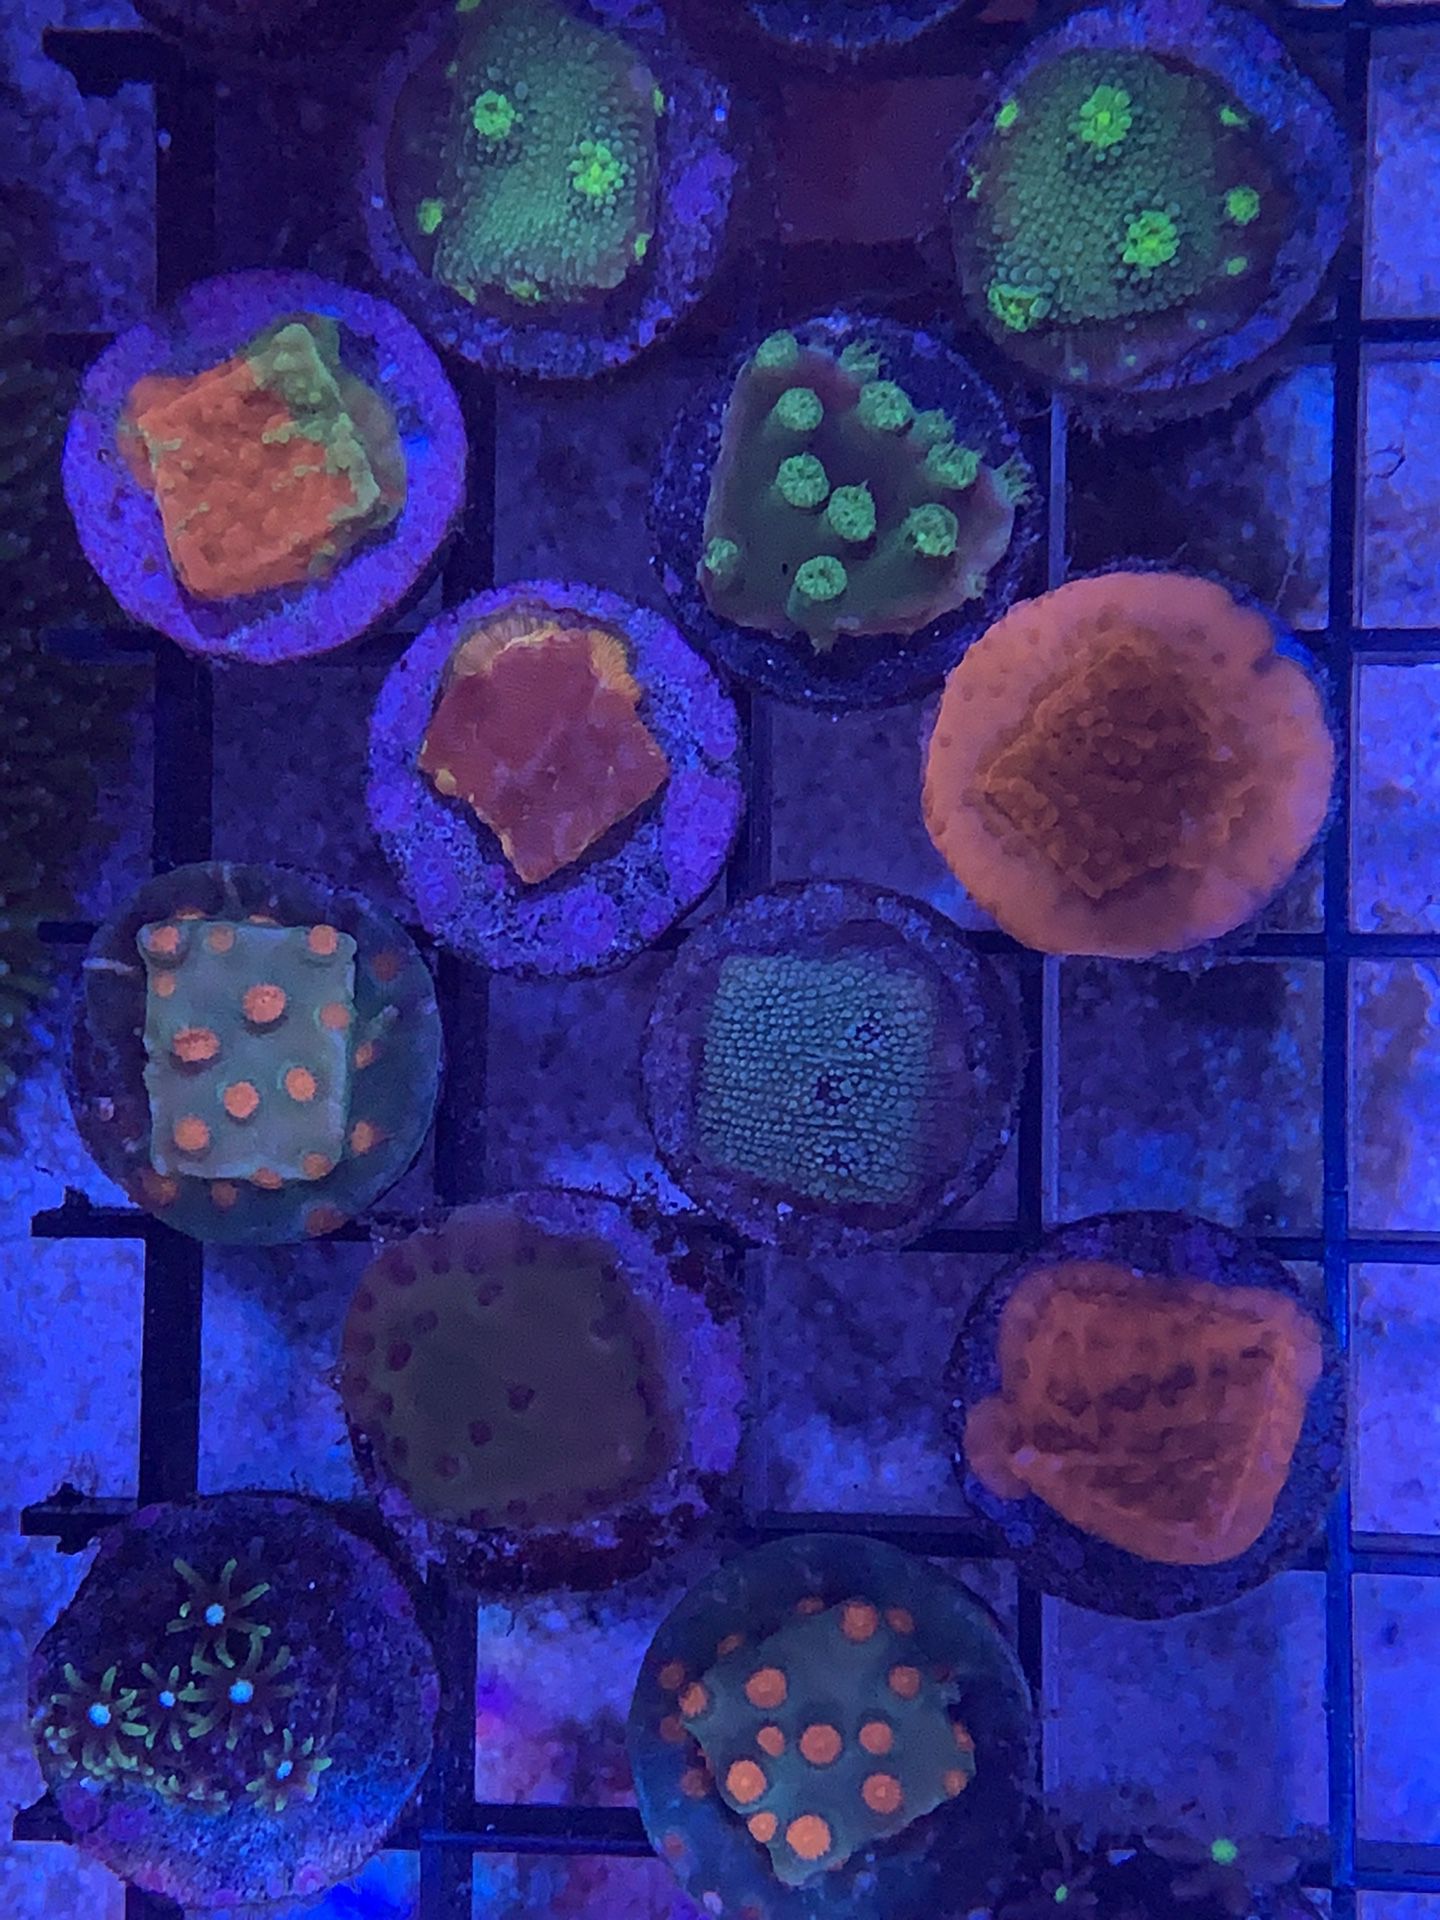 Coral Frags Lps And Sps